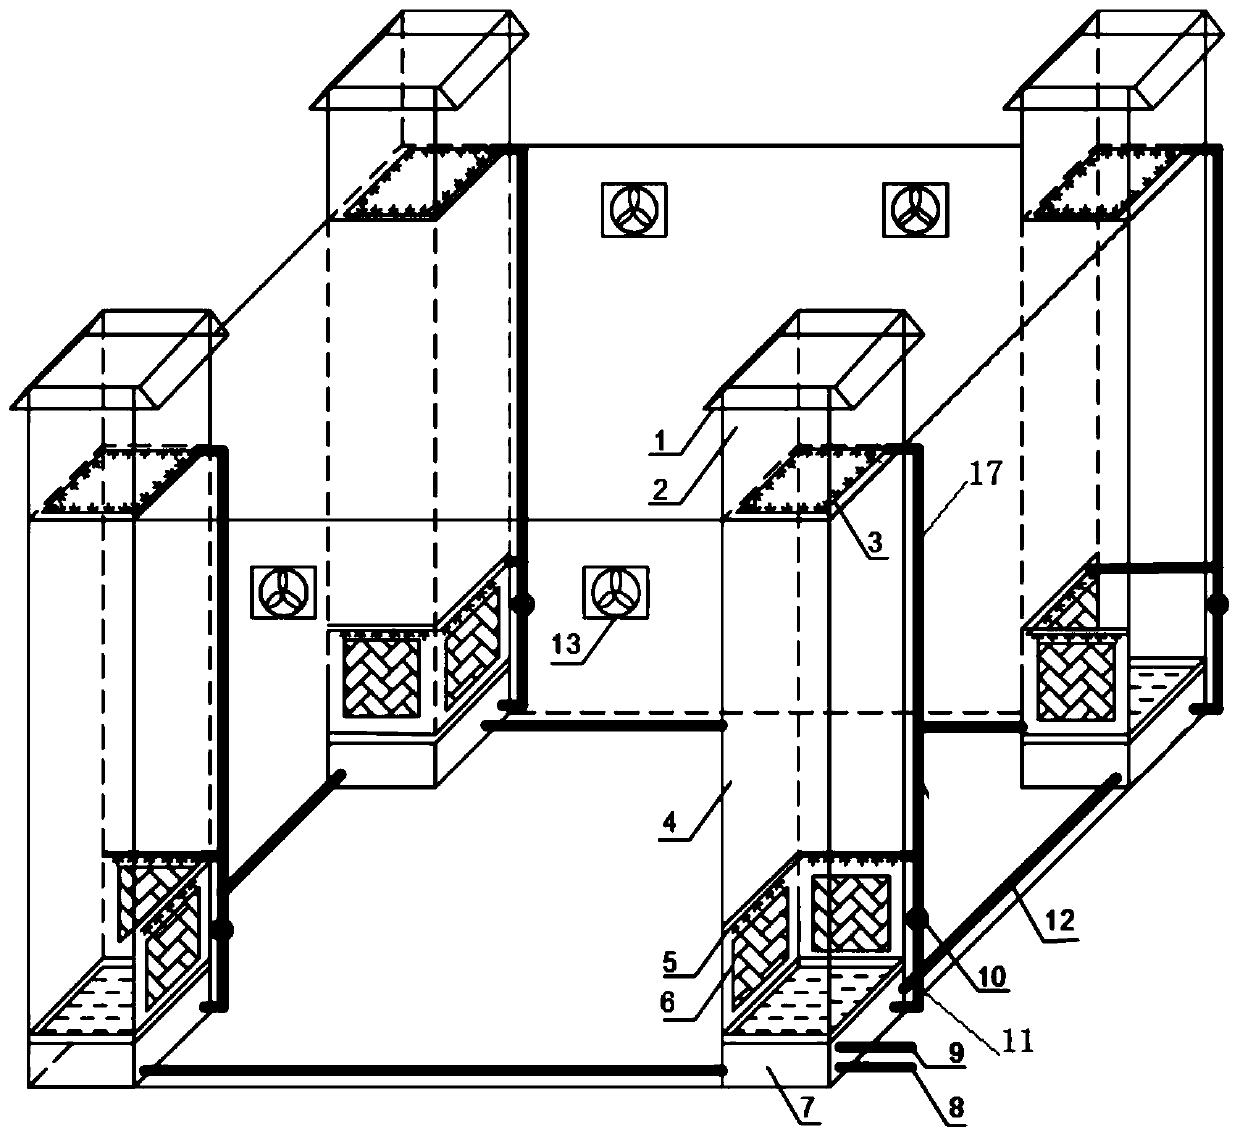 Passive evaporative cooling and ventilation cooling system combined with building